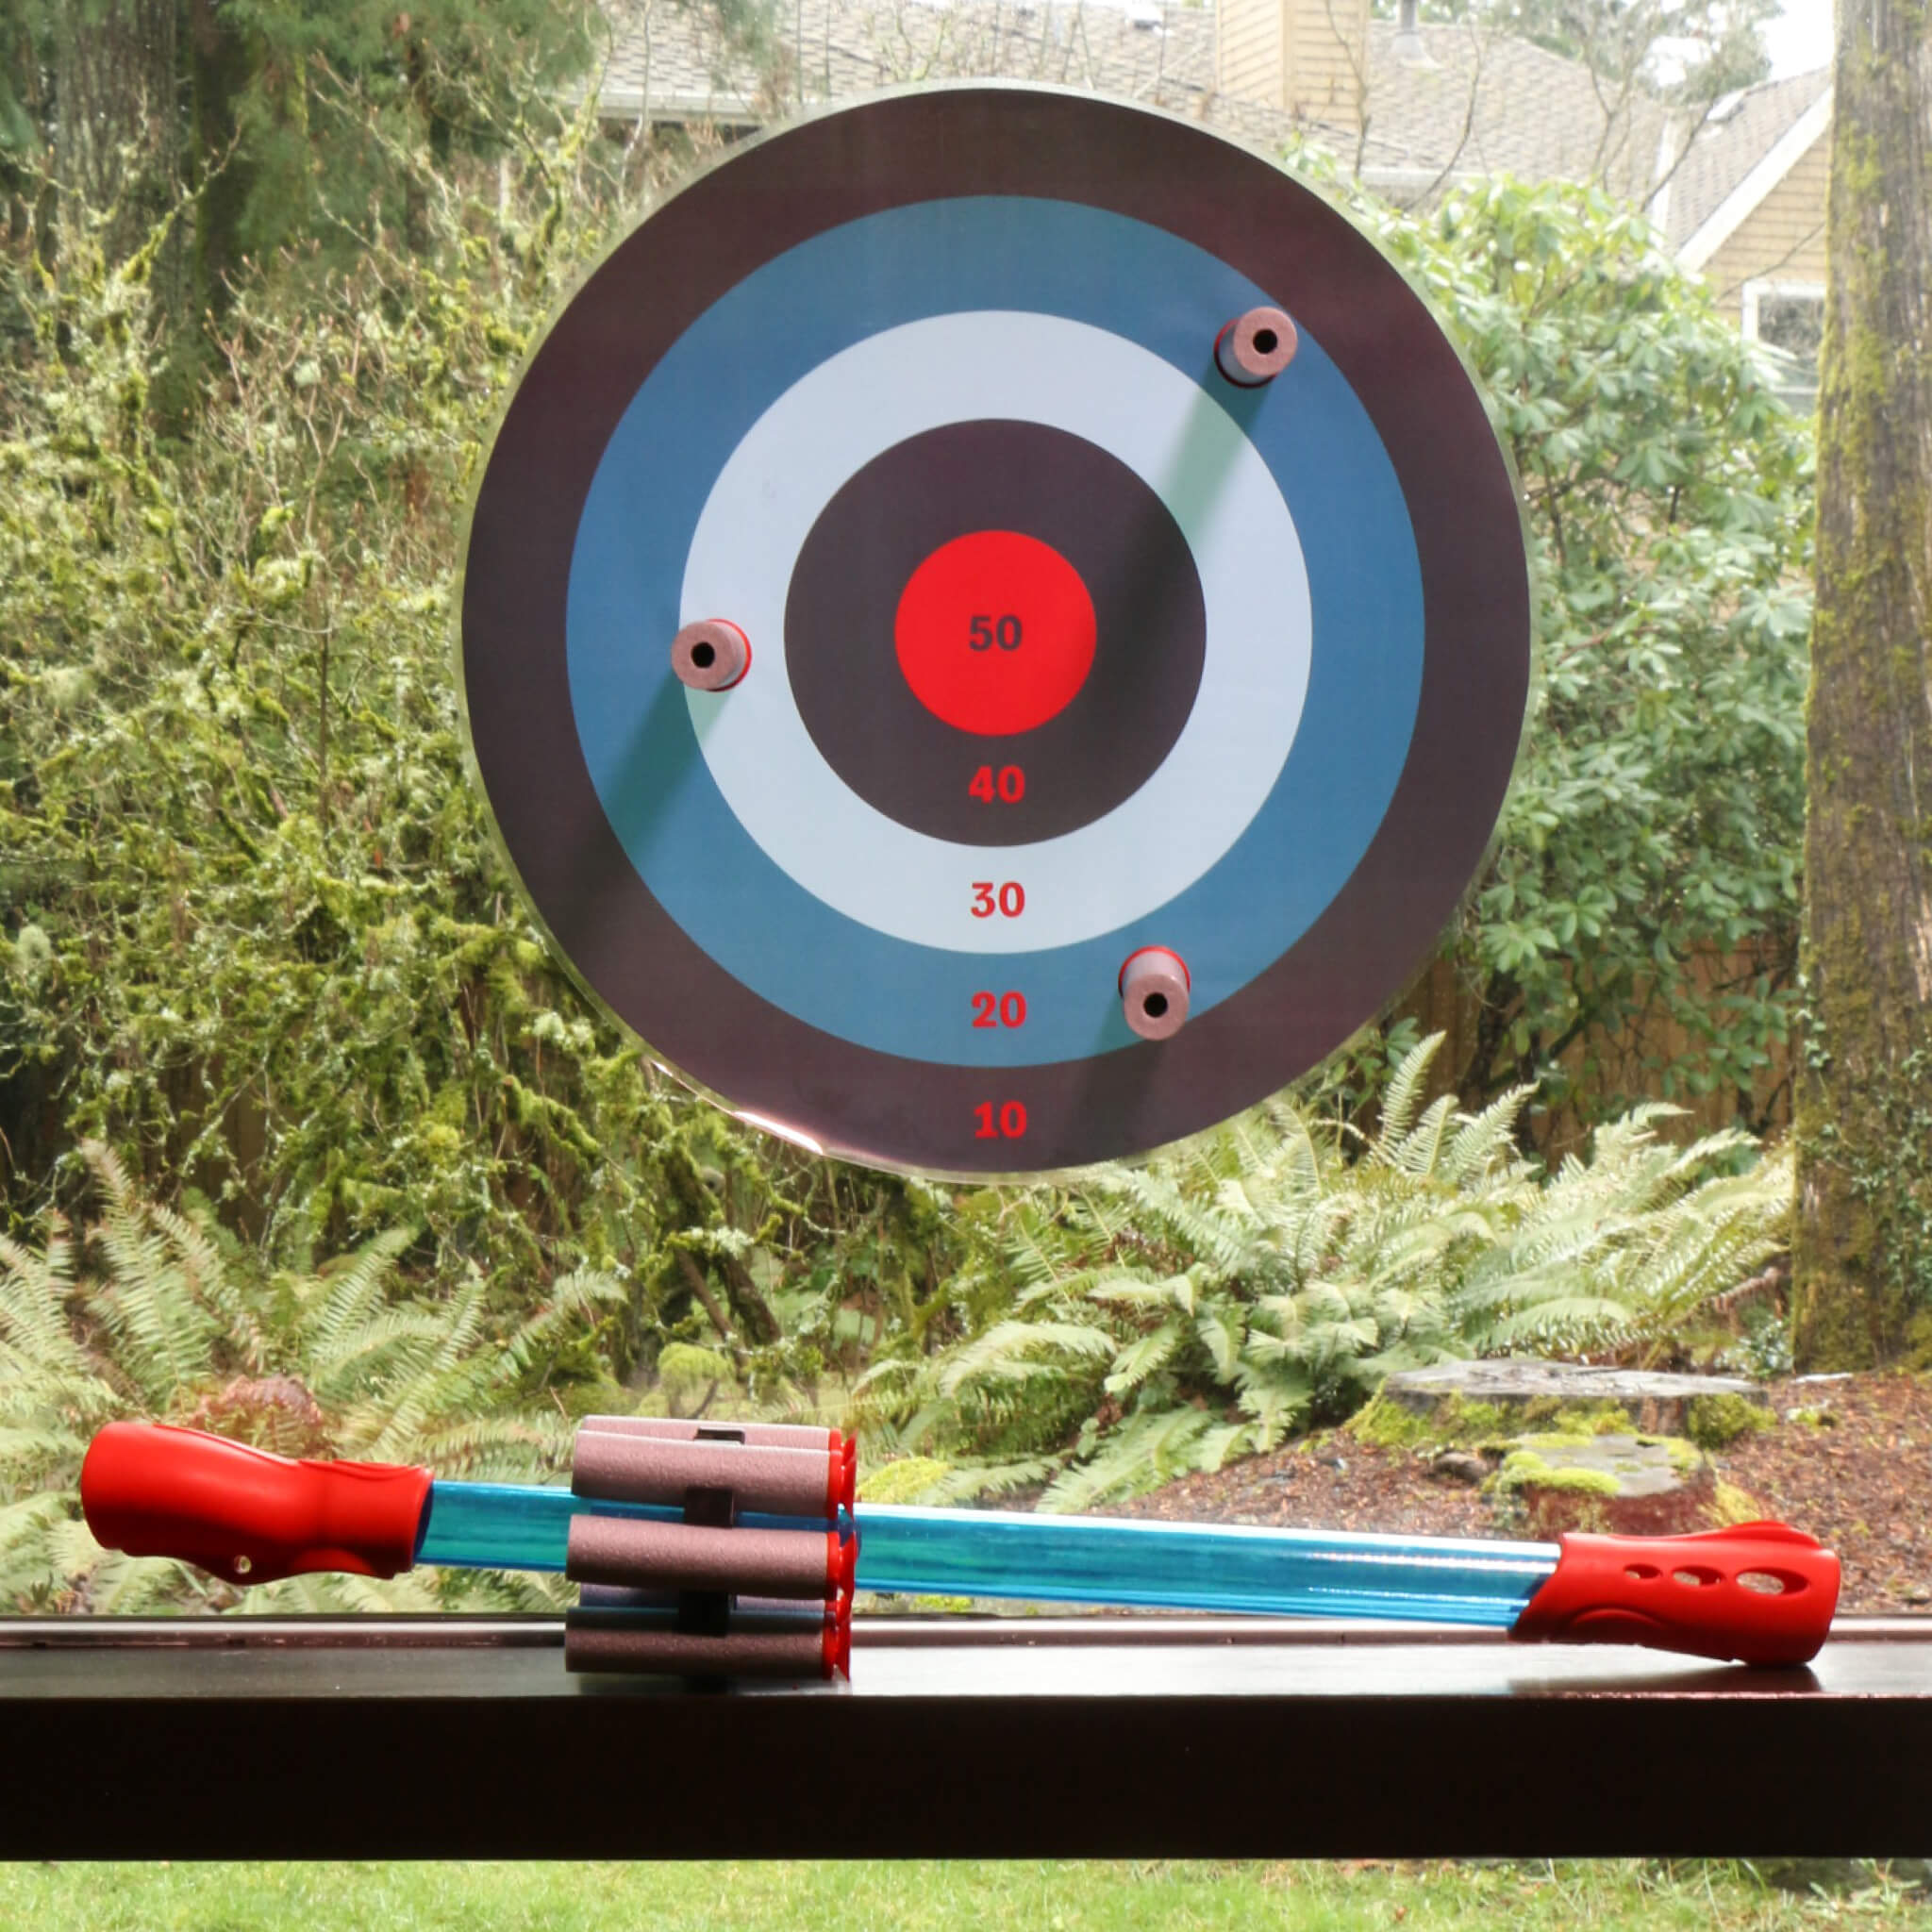 Blow Darts target set by Mighty Fun! Includes 6 darts, ammo holder and target shown on window.